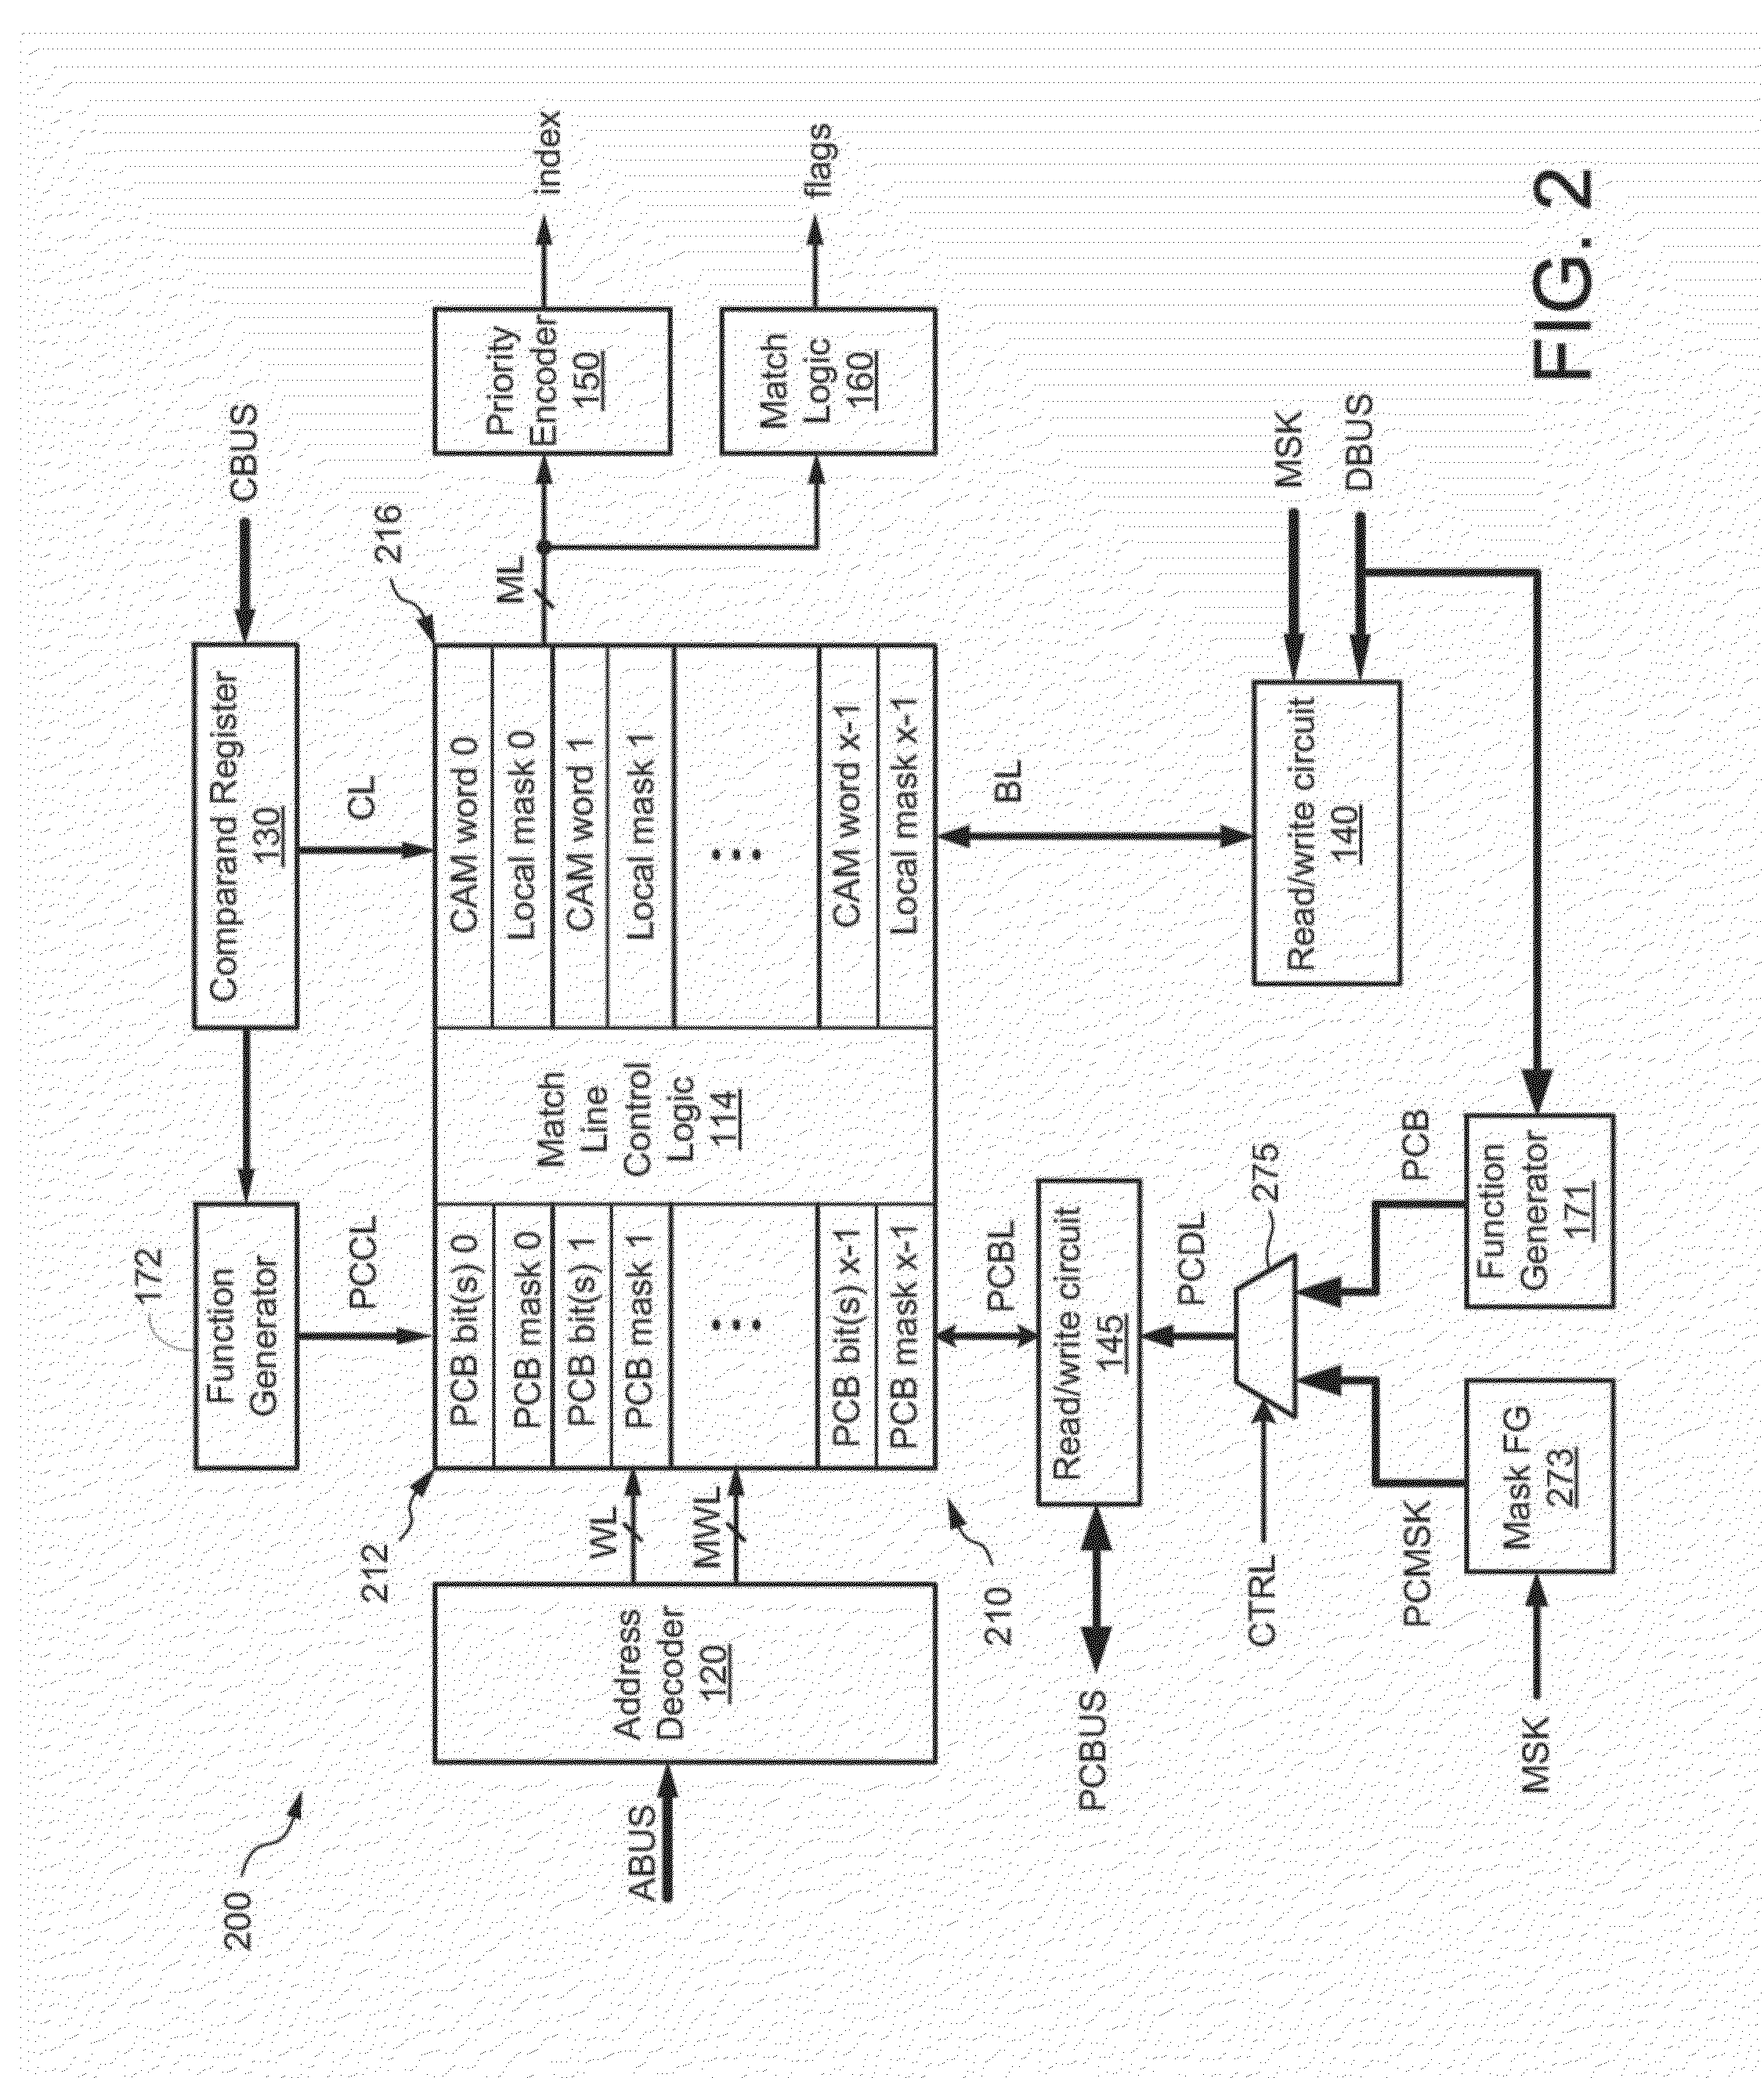 Power Savings in a Content Addressable Memory Device Using Masked Pre-Compare Operations